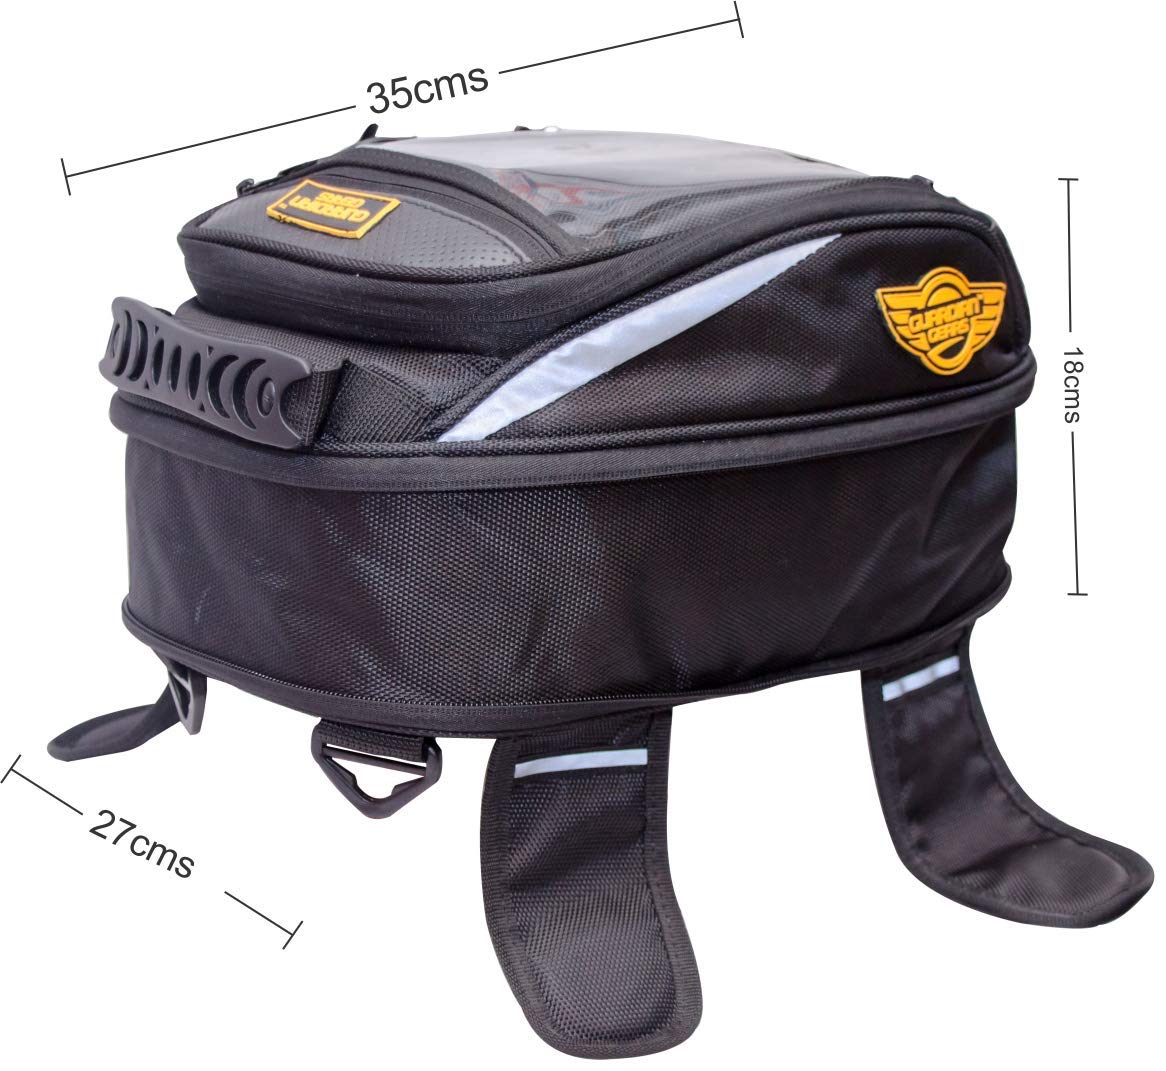 GUARDIANGEARS Jaws Mini 18L Magnetic Tank Bag with Rain Cover for All  Motorbikes with a Metal Tank- Buy Online in Angola at  angola.desertcart.com. ProductId : 115461829.